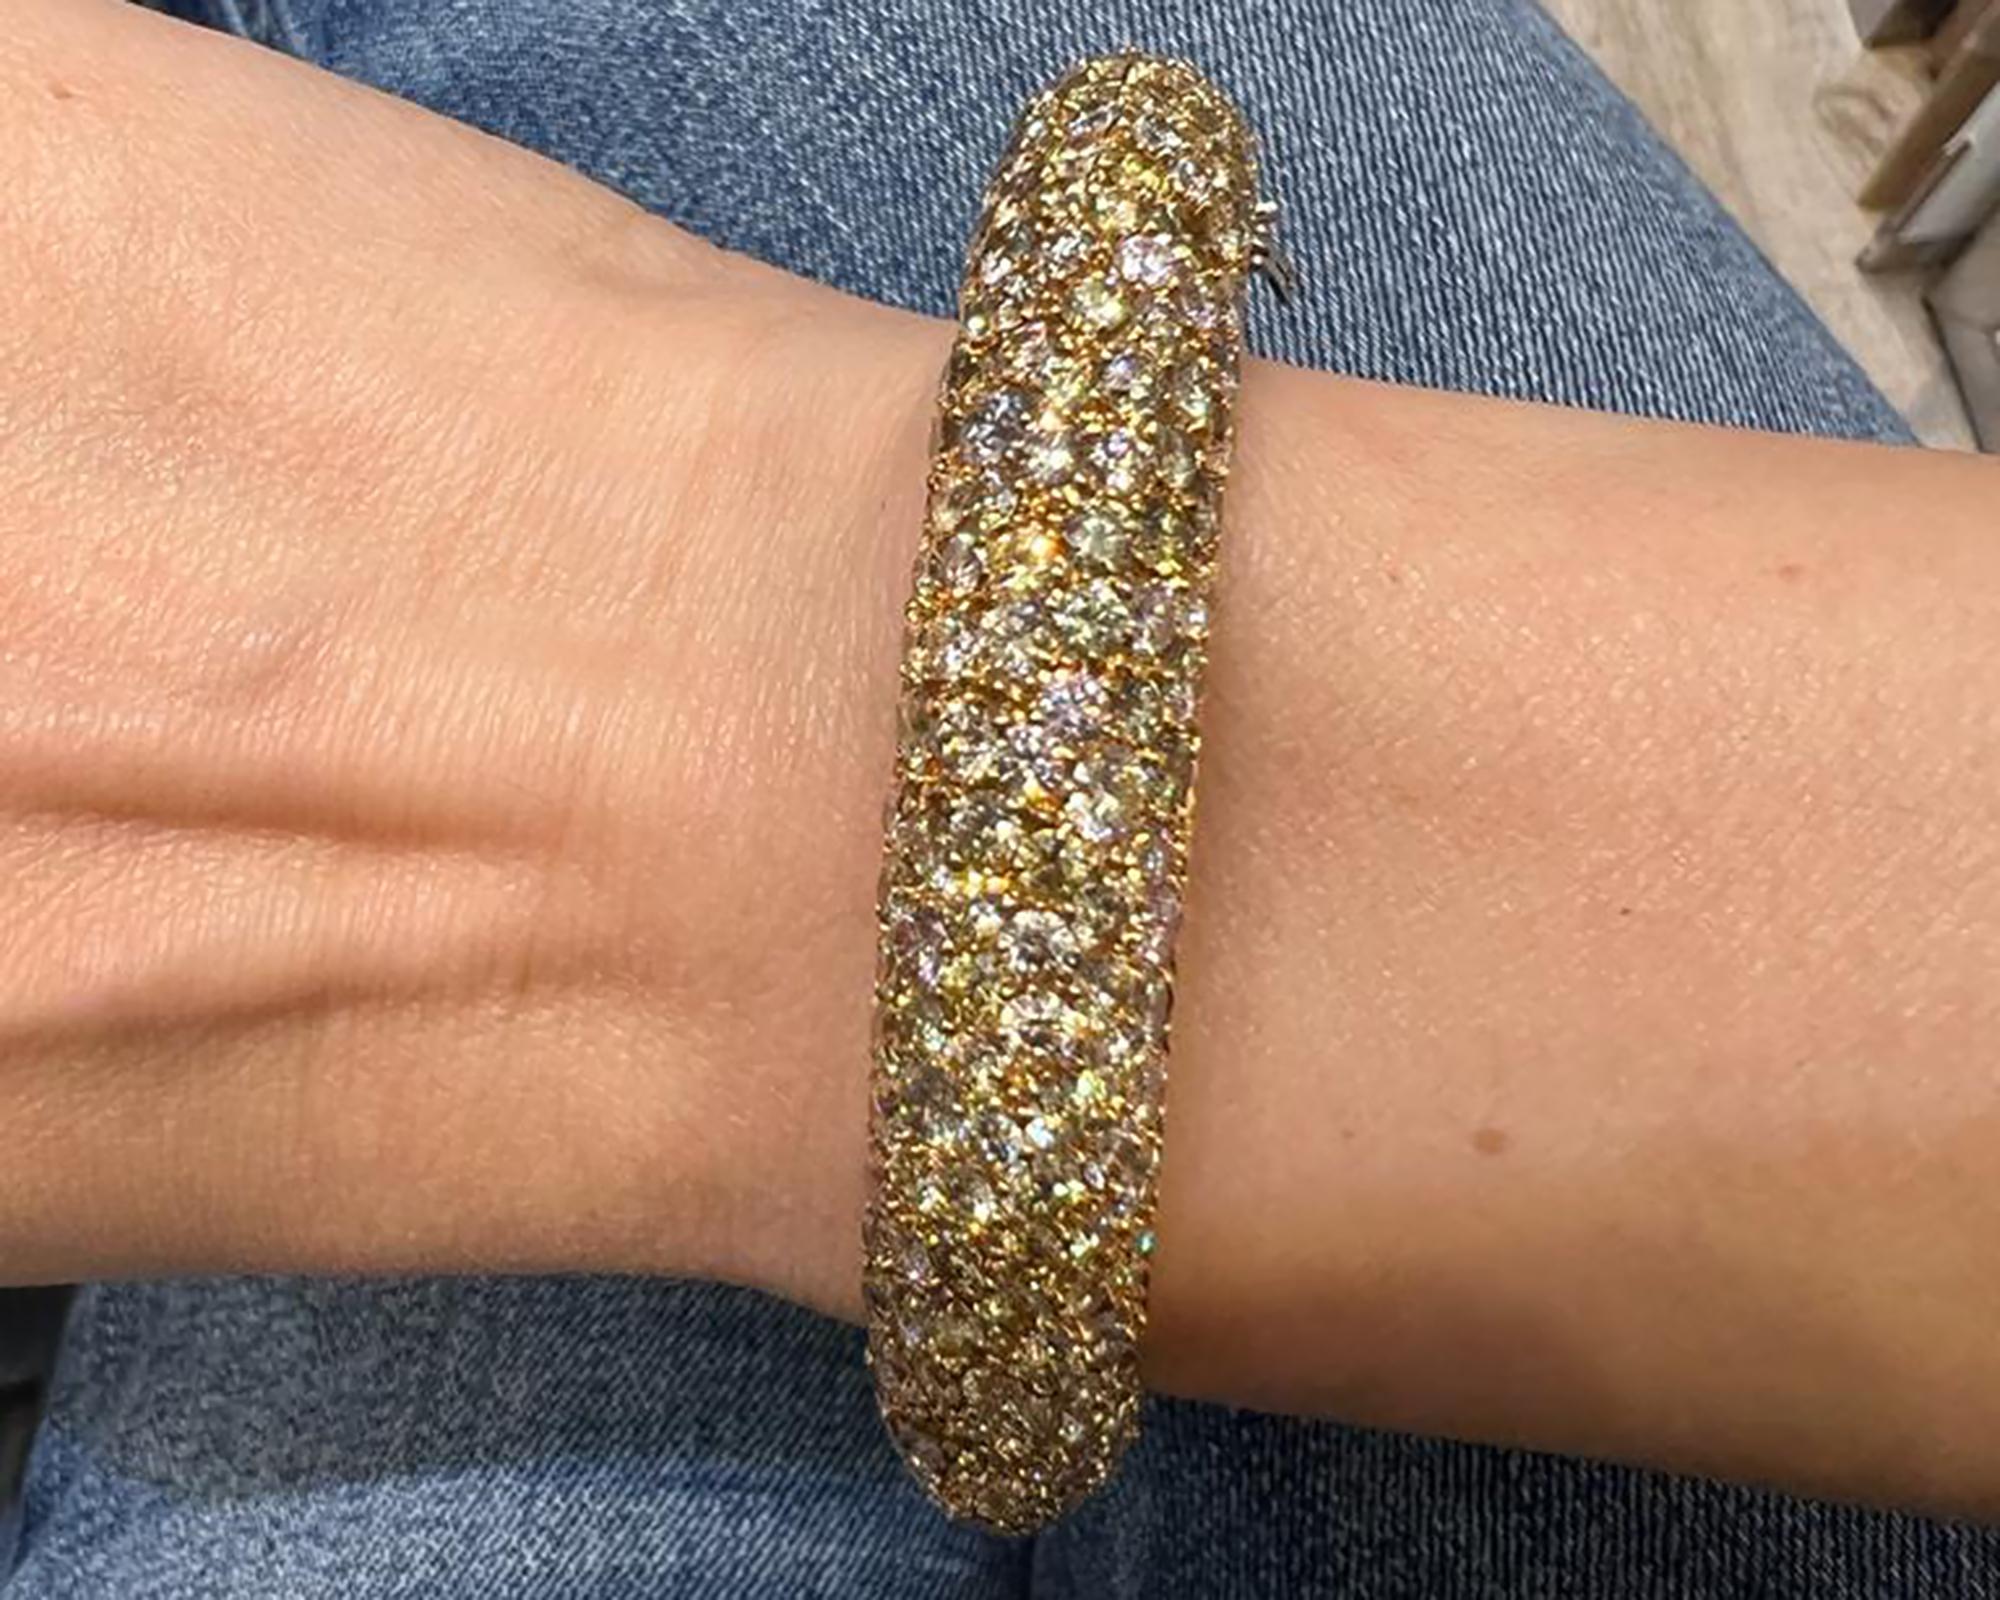 Multicolored diamonds can have an ethereal quality that is extremely delicate and light in a way that is too perfect for this world. This Contemporary Multicolor Diamond Pavé Bombé Bangle Bracelet, made by Spectra Fine Jewelry in 2021, is crafted in